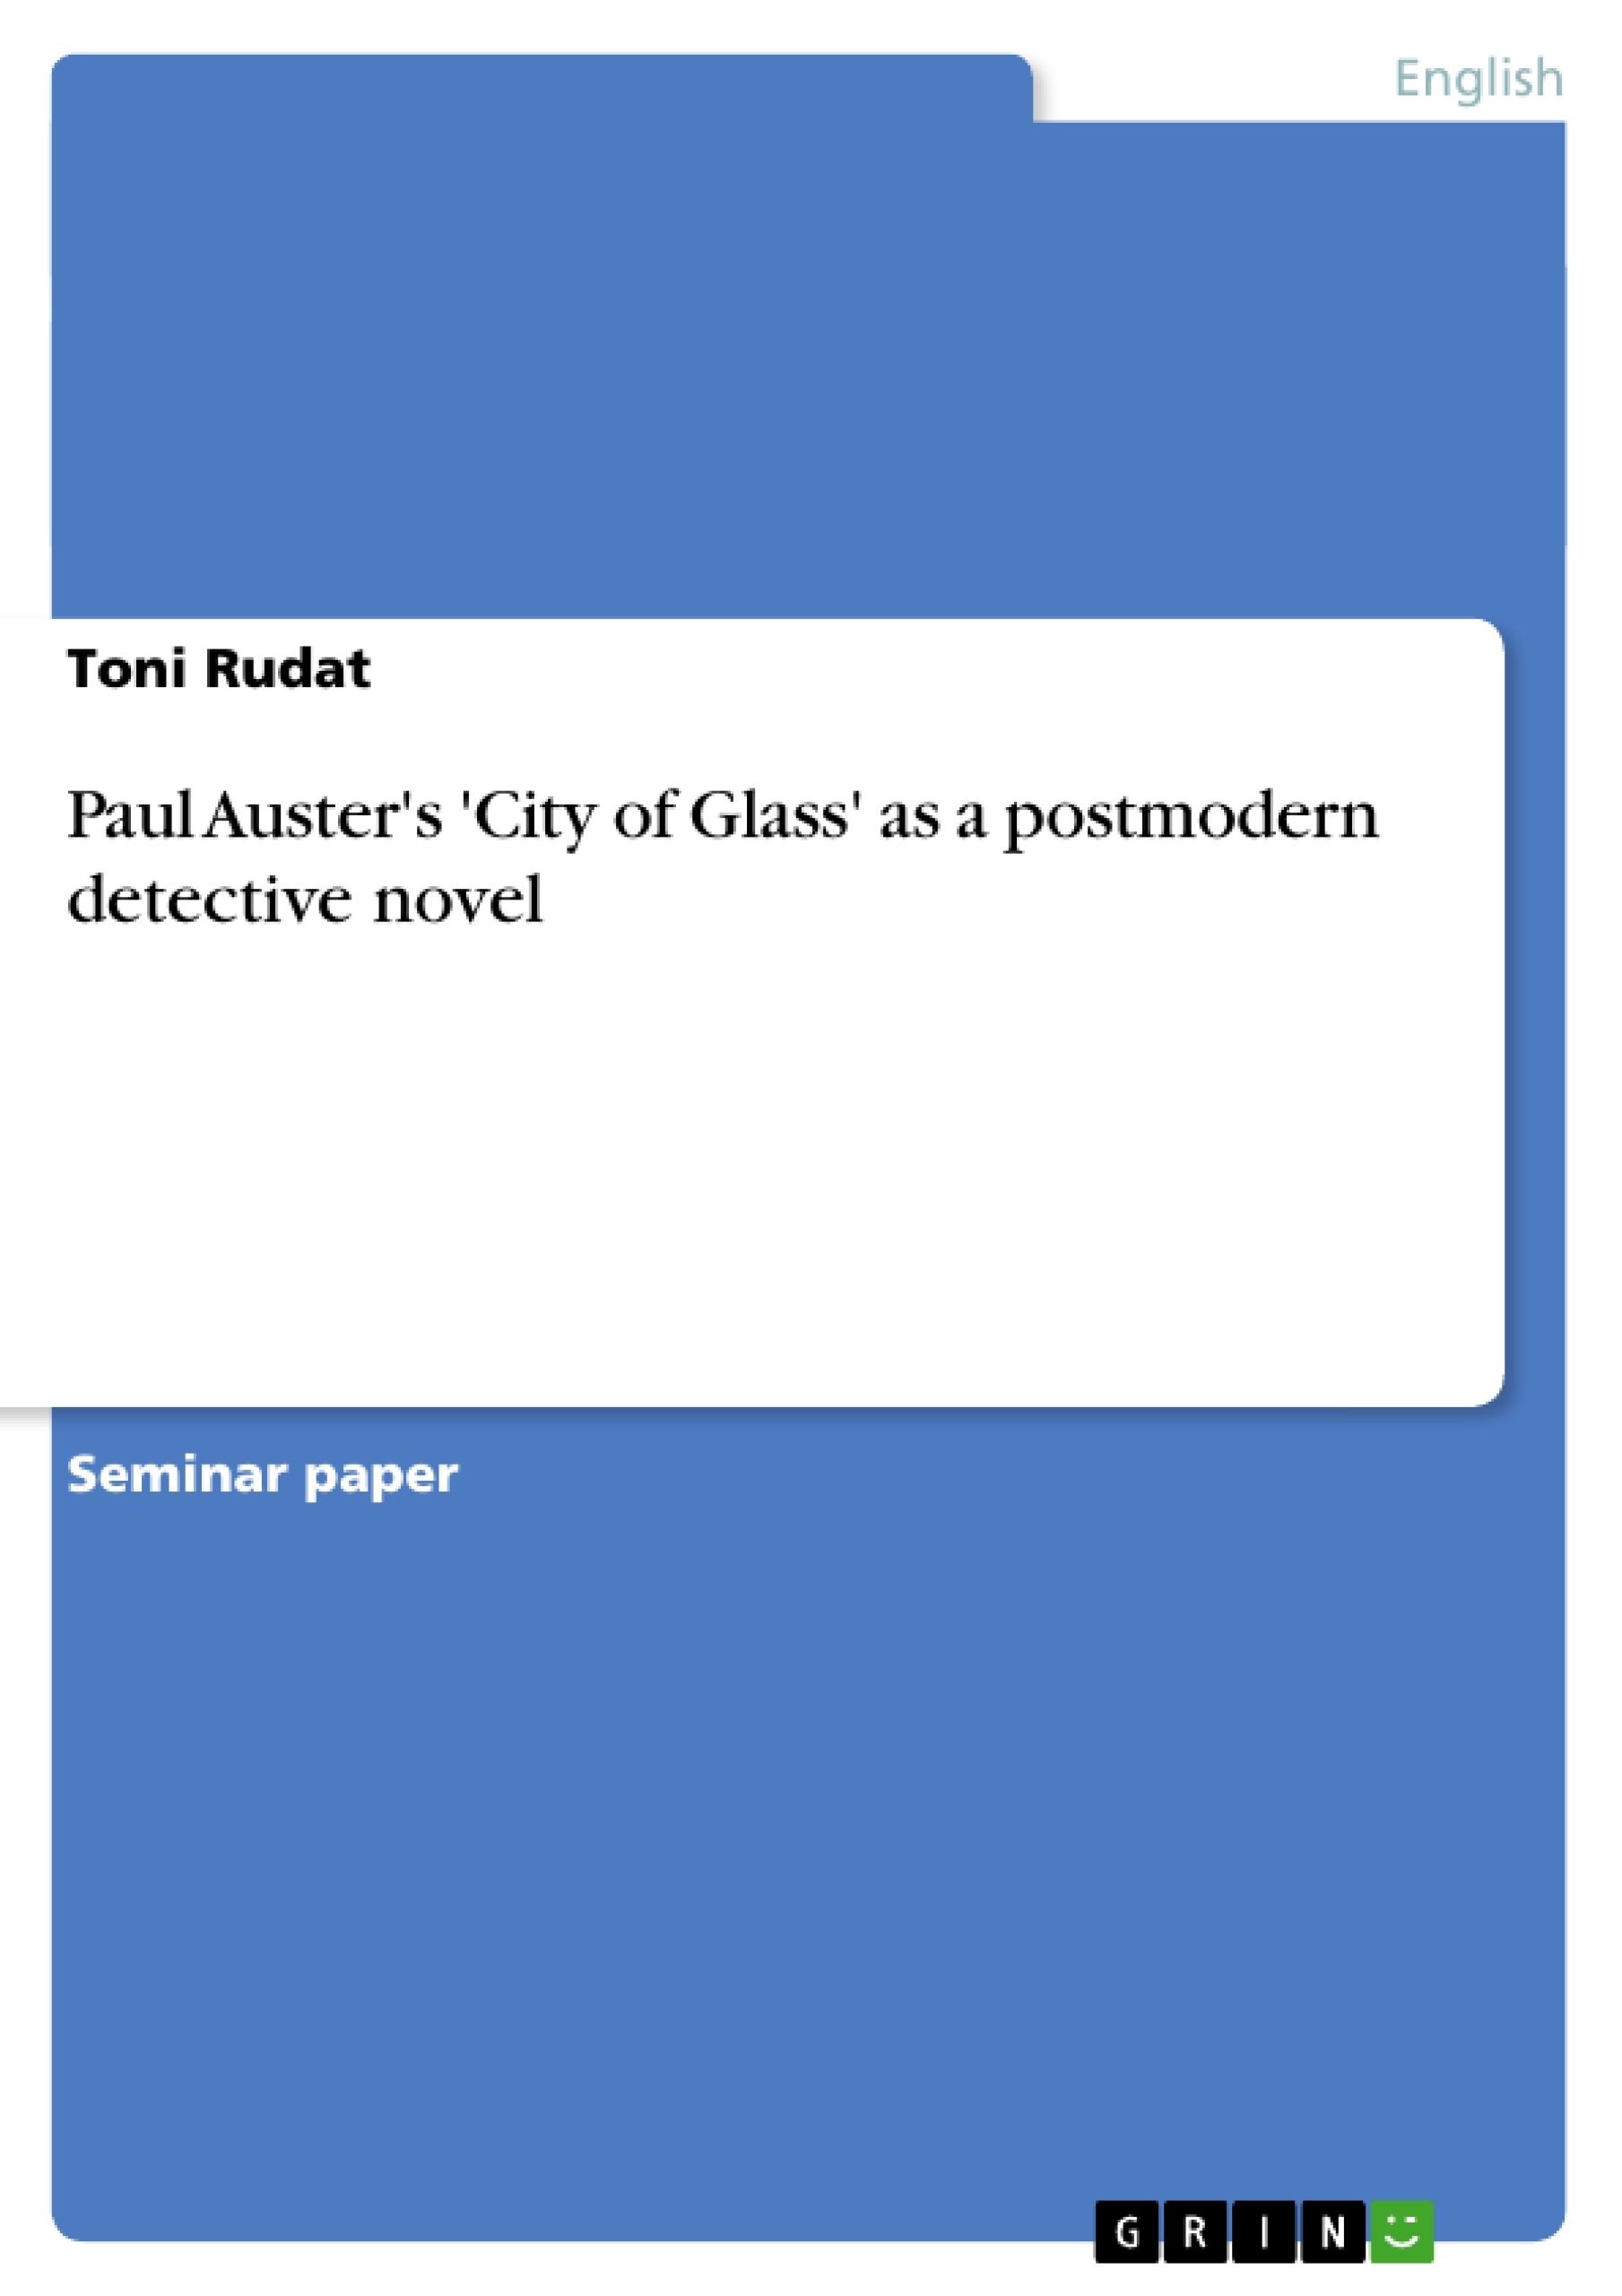 Title: Paul Auster's 'City of Glass' as a postmodern detective novel